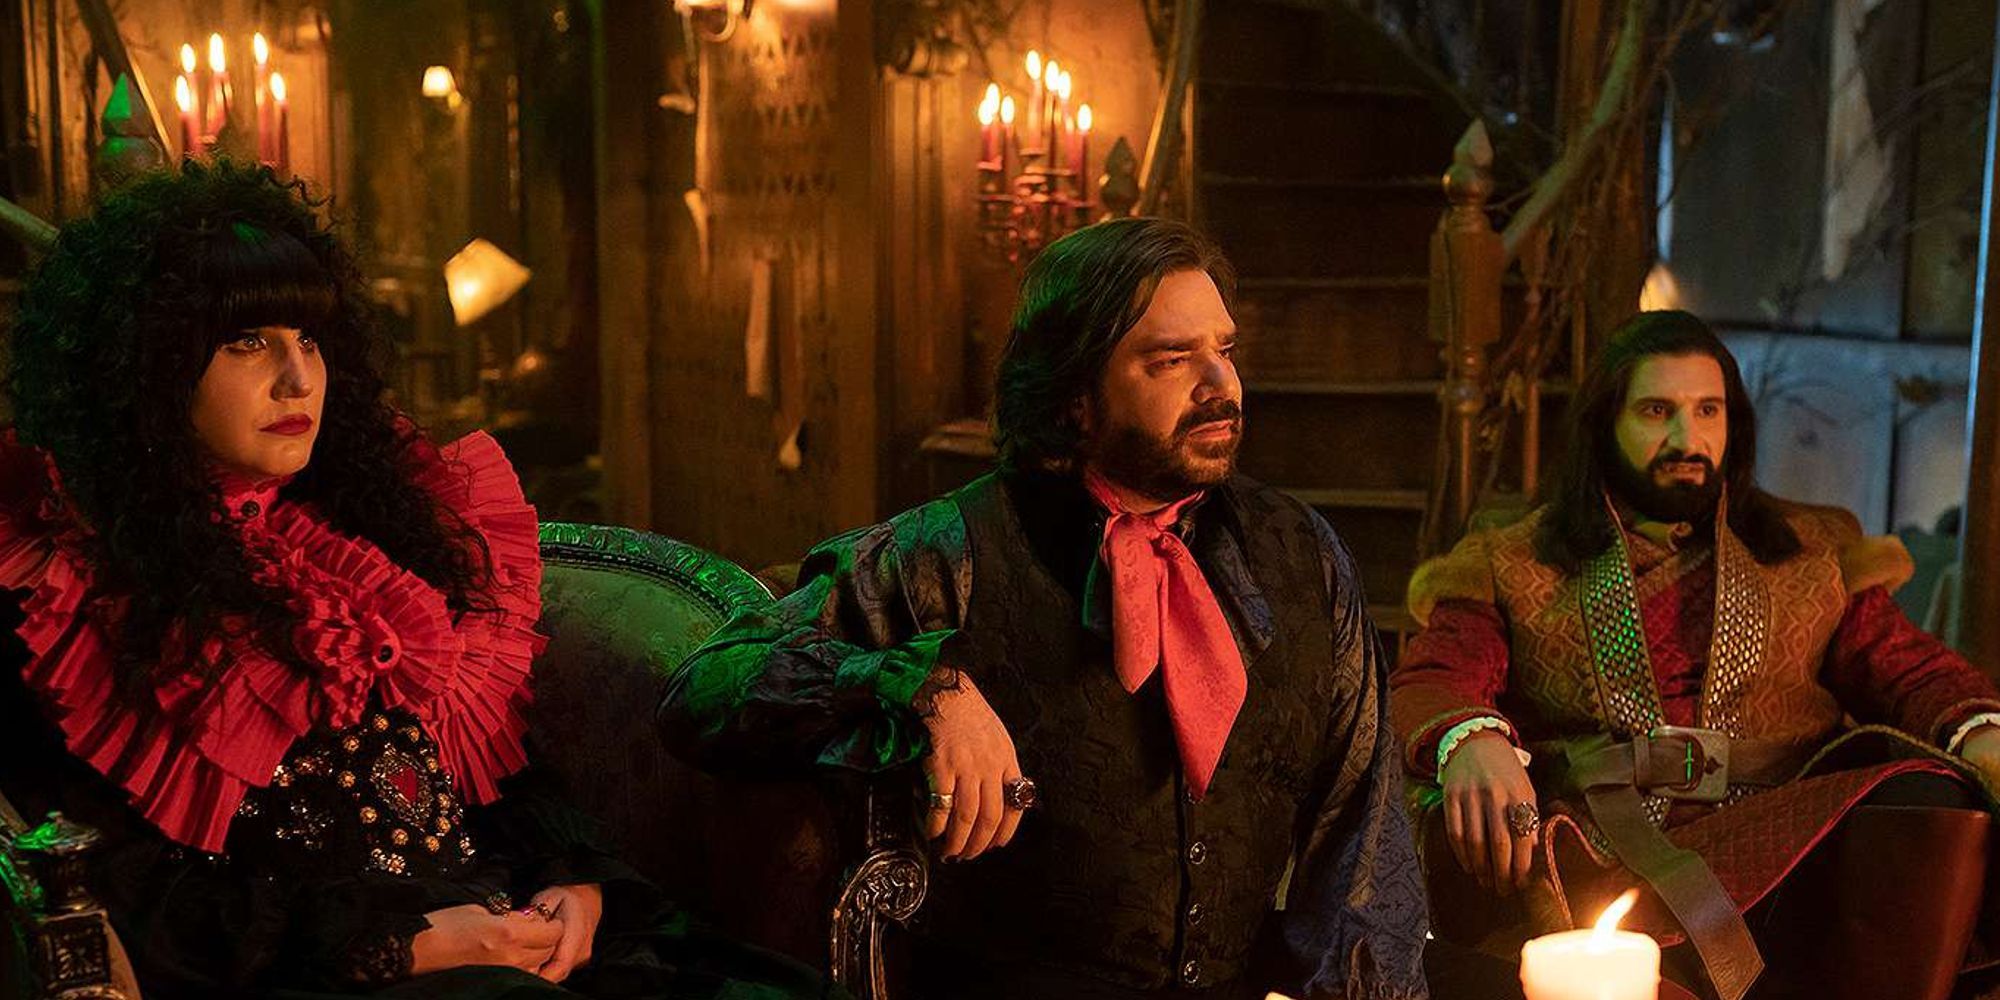 Natasia Demetriou, Matt Berry, and Kayvan Novak as Nadja, Lazslo, and Nandor sitting and looking attentively in What We Do in The Shadows